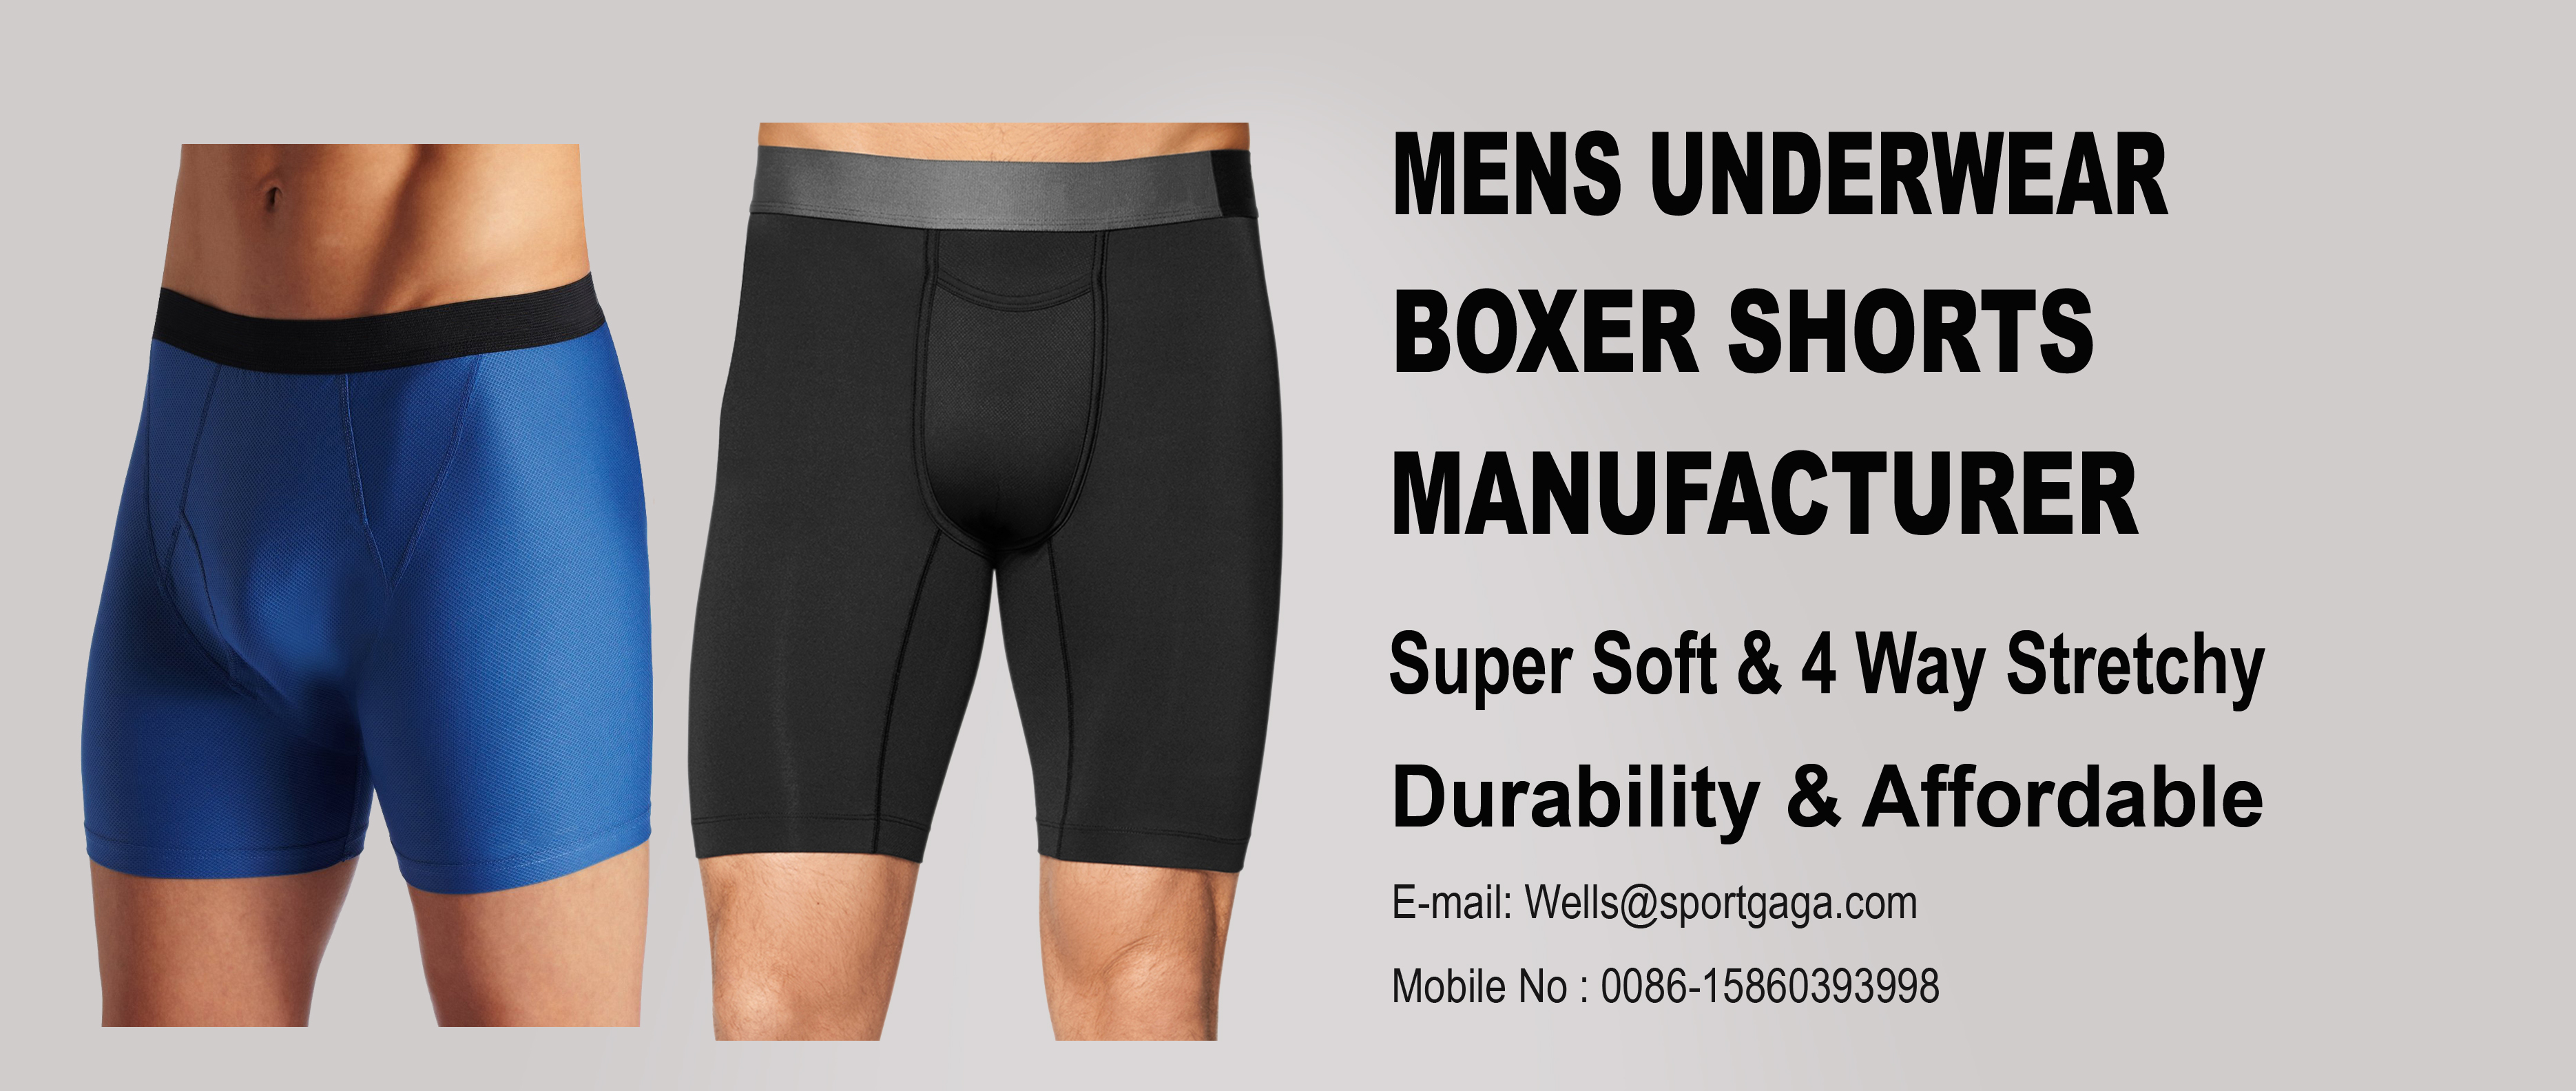 China Antibacterial Underwear Manufacturer and Supplier, Factory, Products